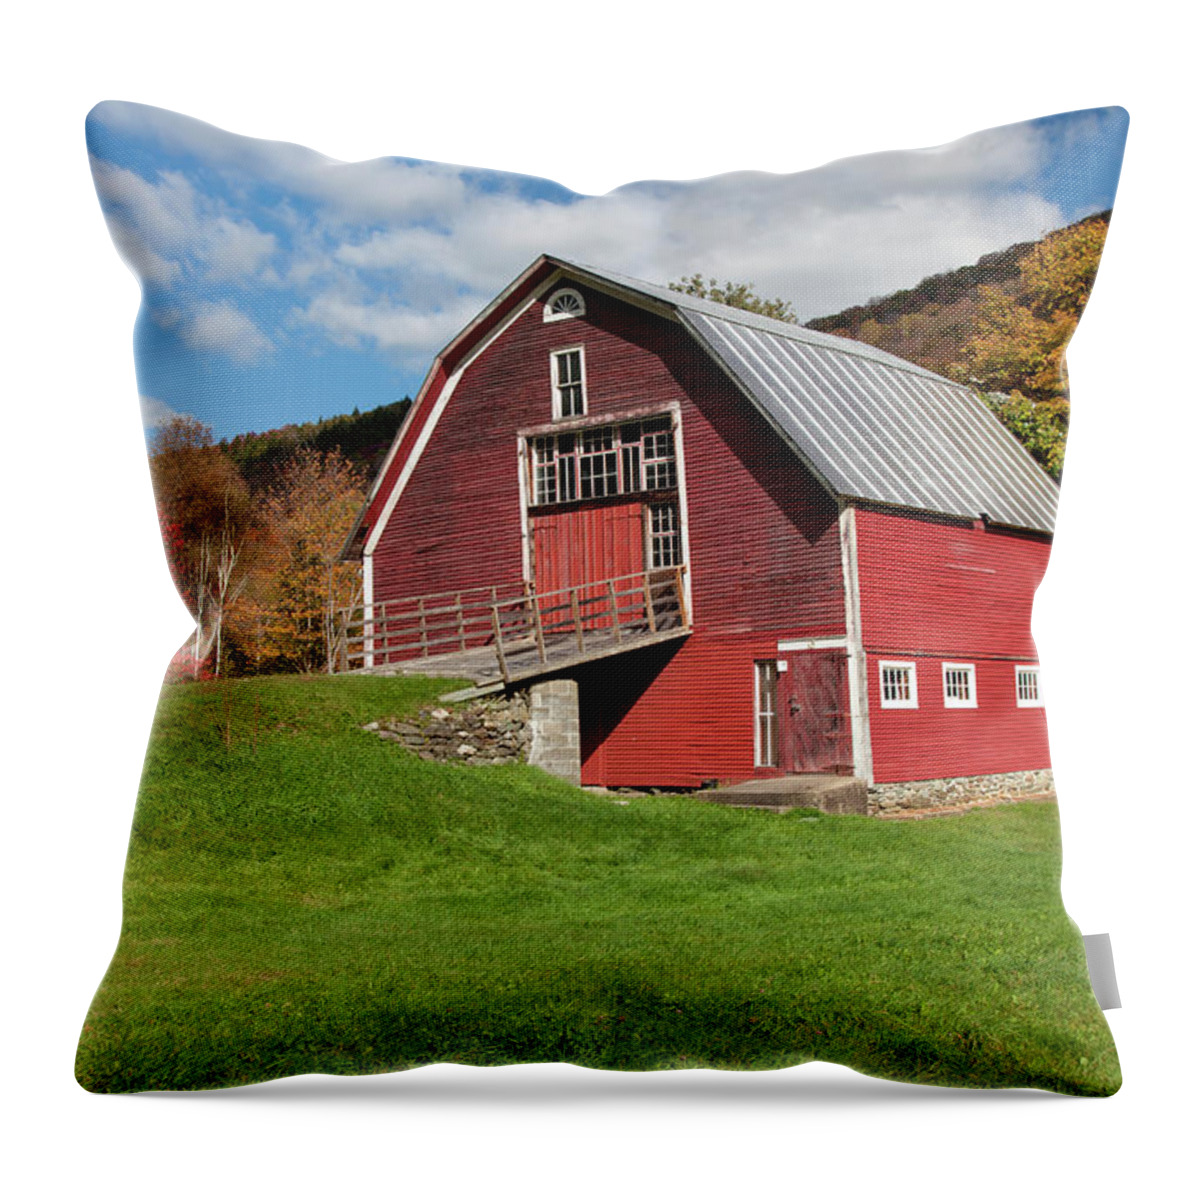 Autumn Throw Pillow featuring the photograph Red Barn With Blue Sky Along Route 100 #1 by Jenna Szerlag